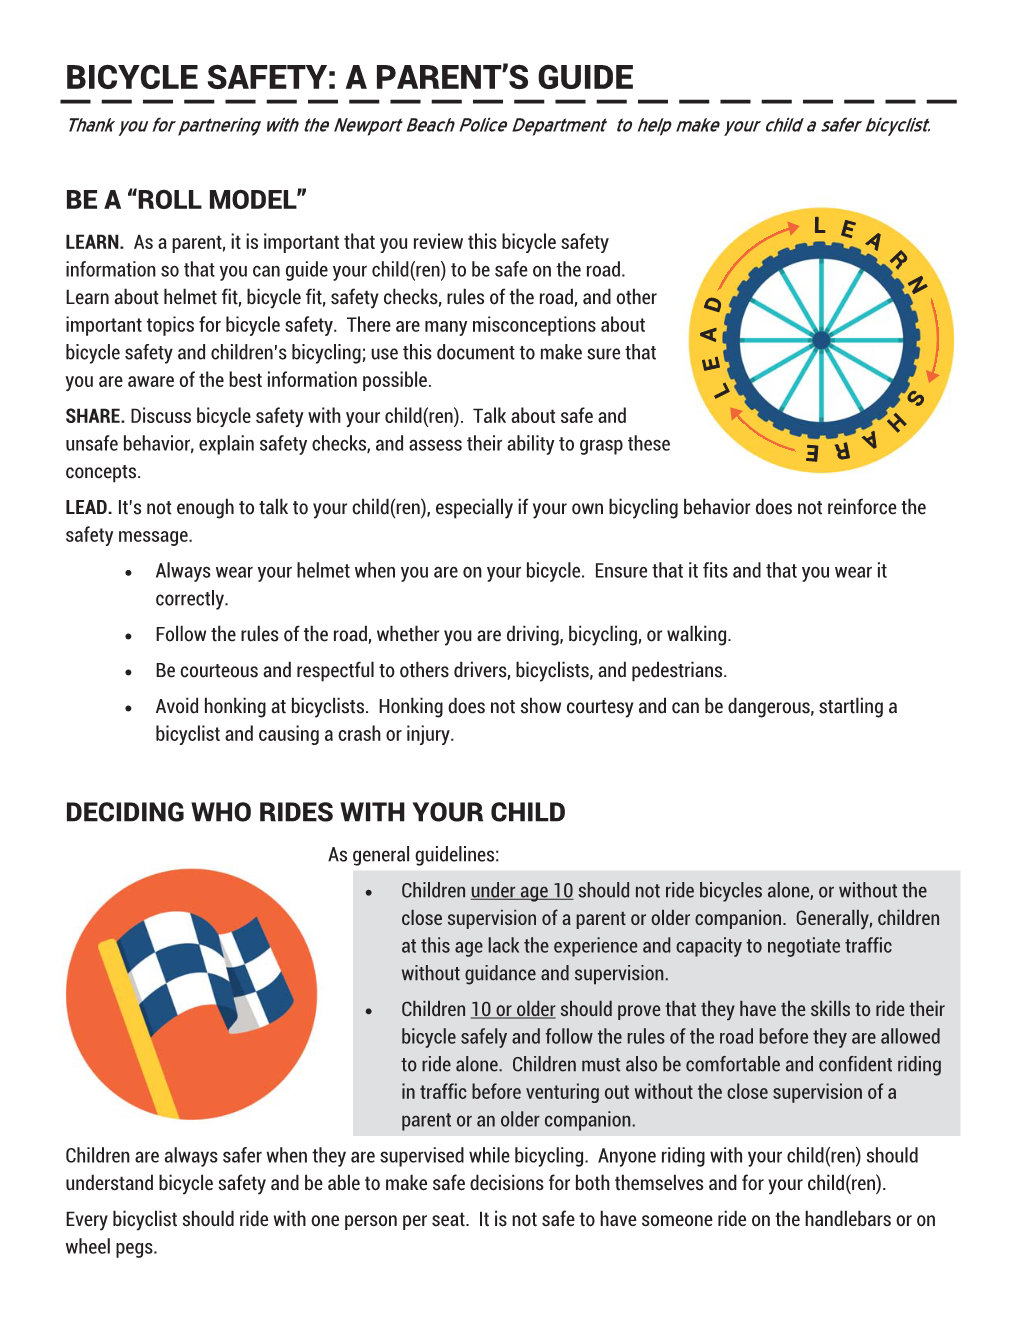 Bicycle Safety: a Parent's Guide